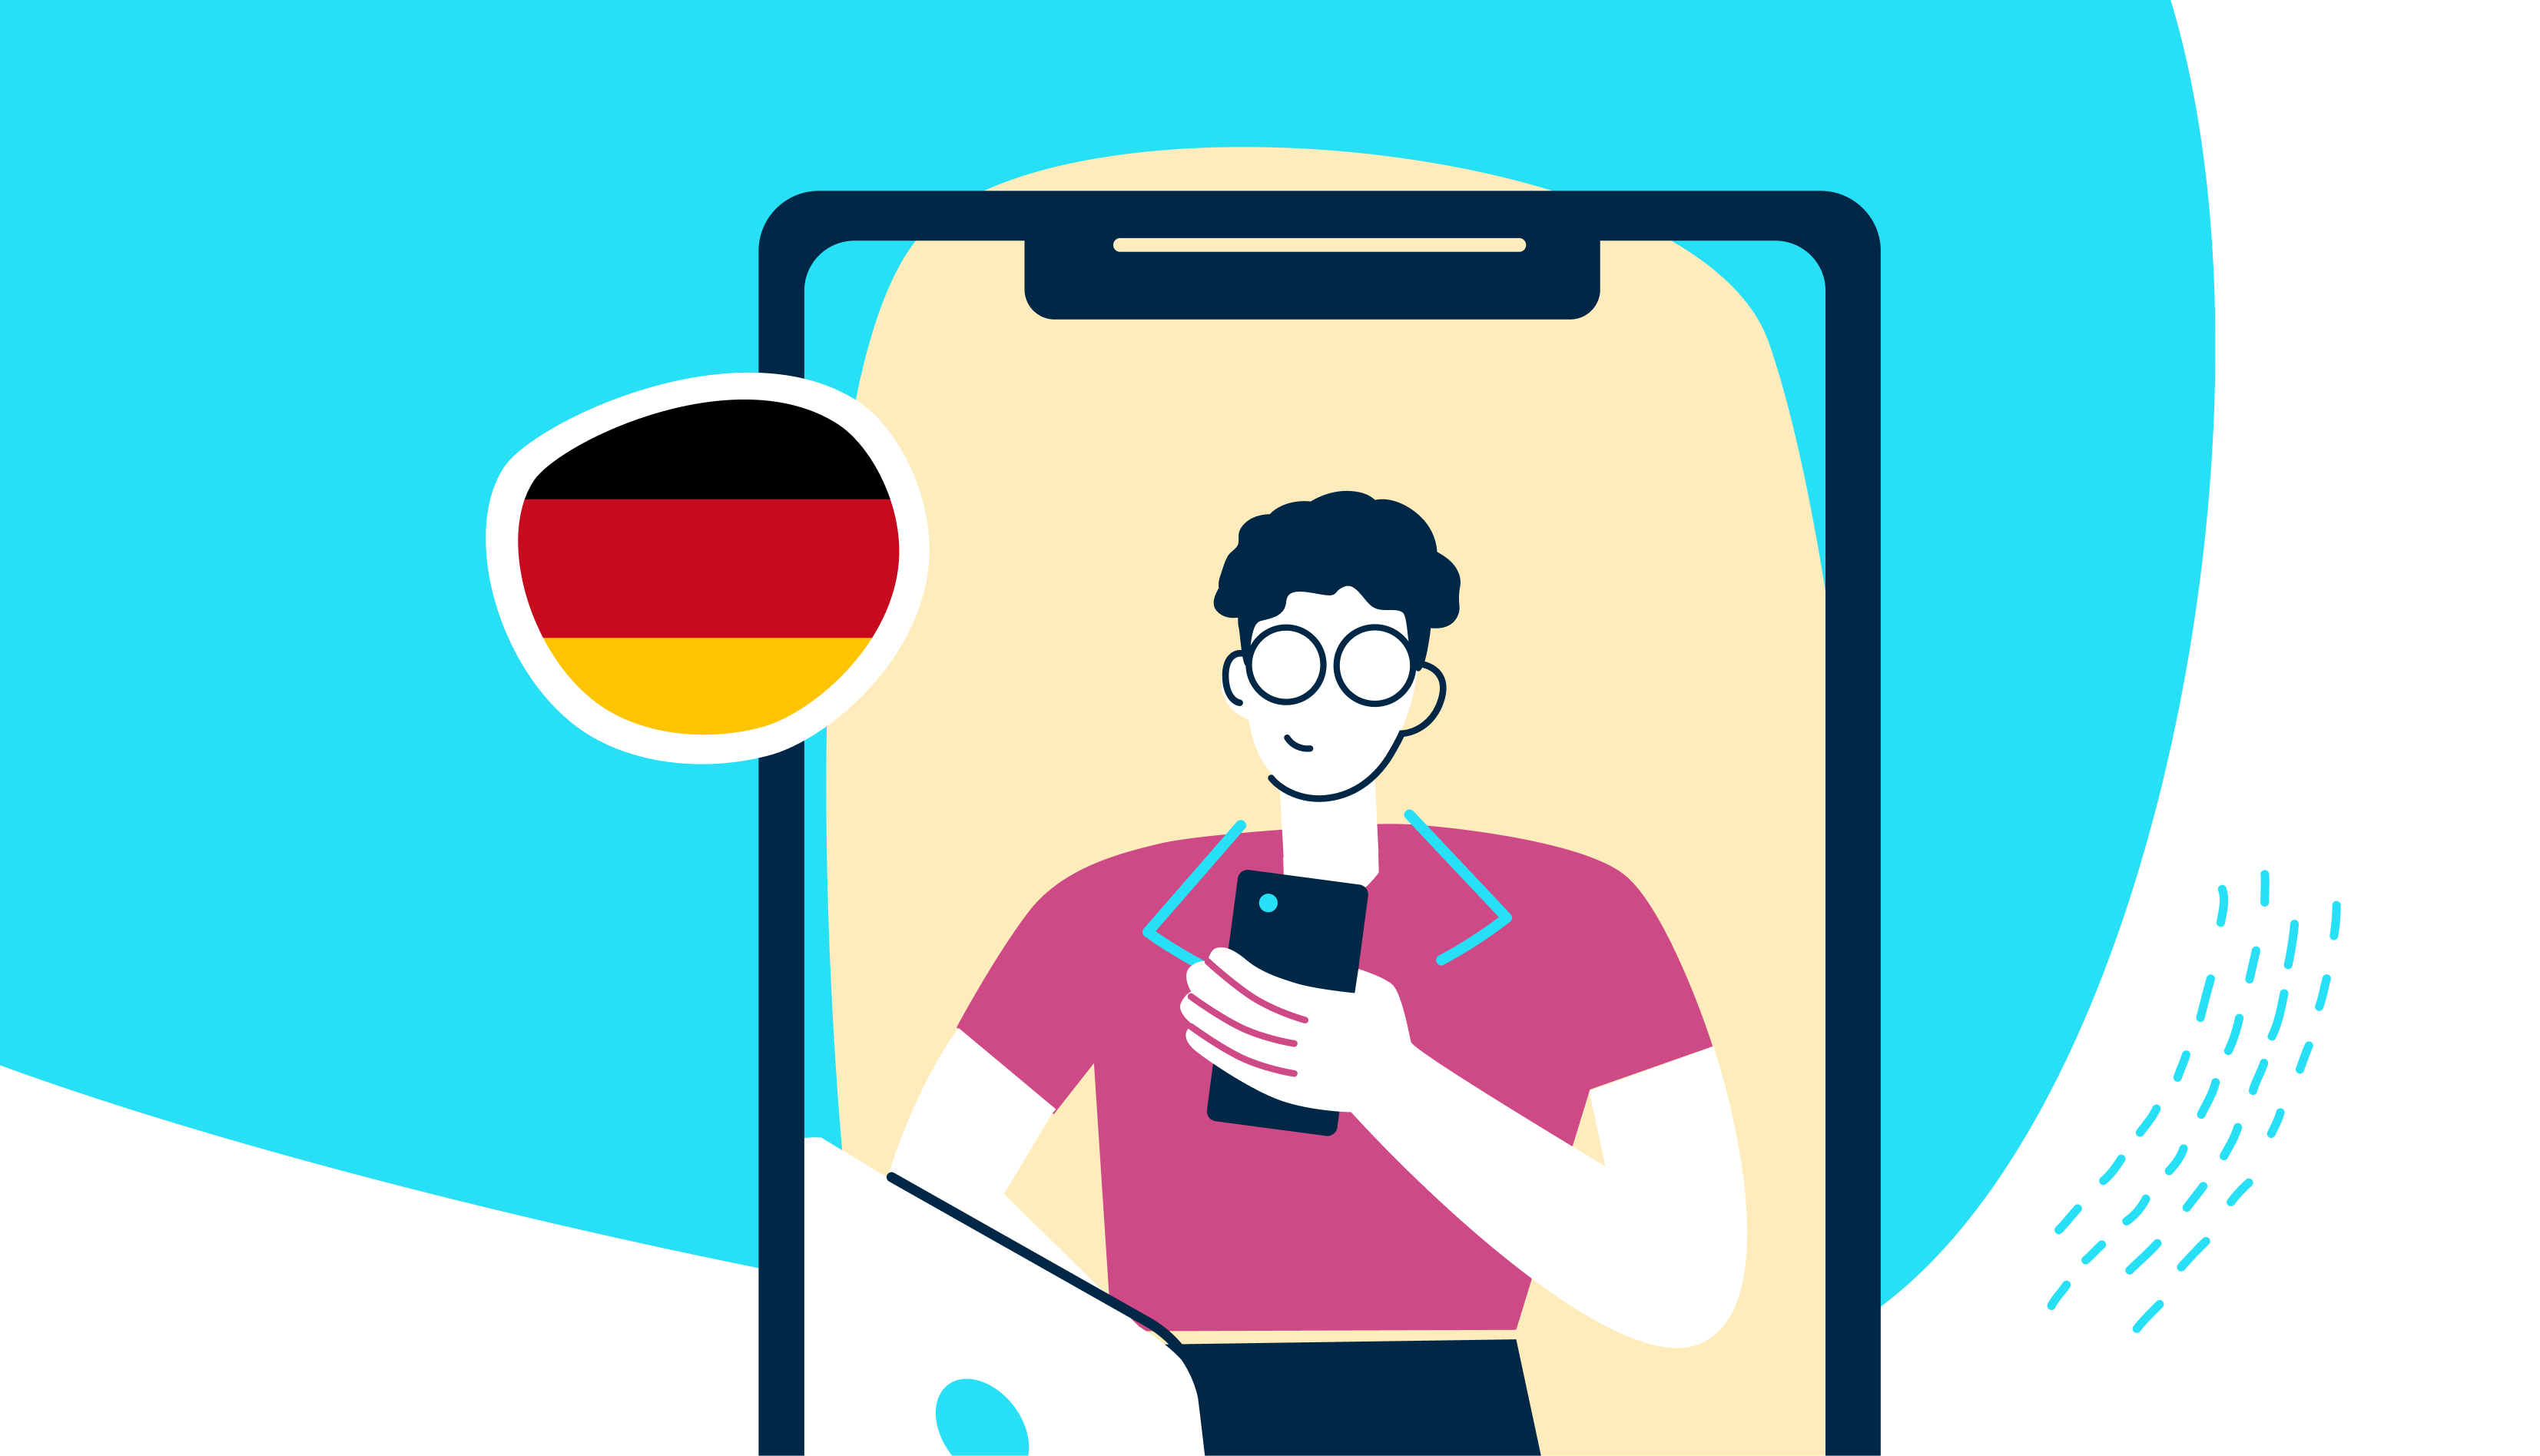 150+ Common German Phrases to Sound Like a Native Speaker